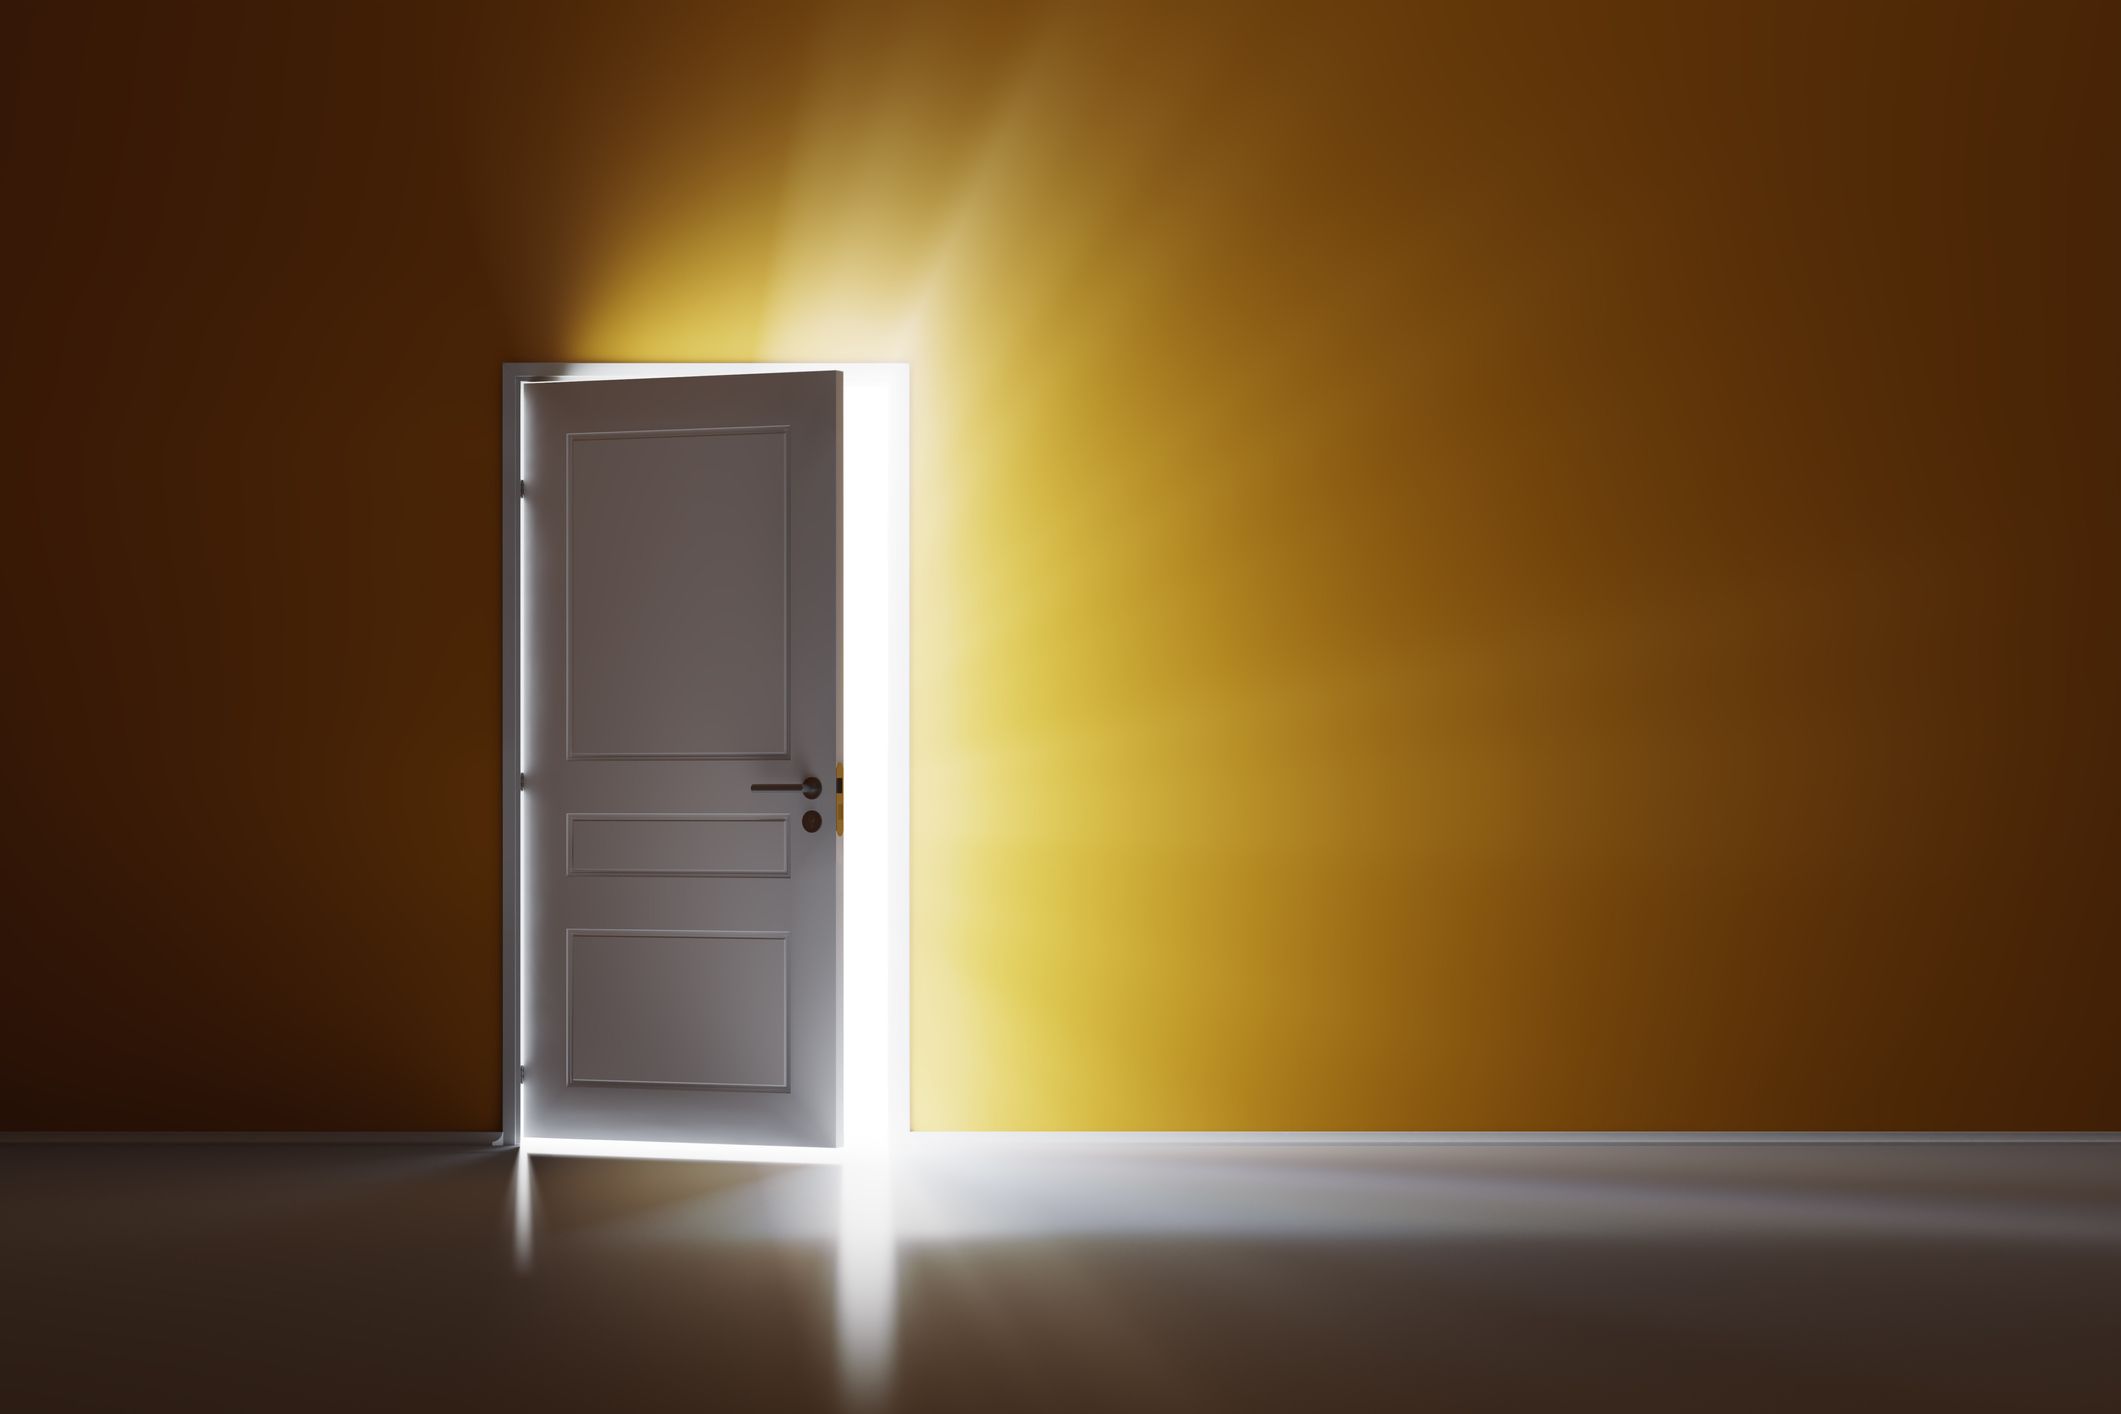 A door cracked open with light streaming through; Getty Images